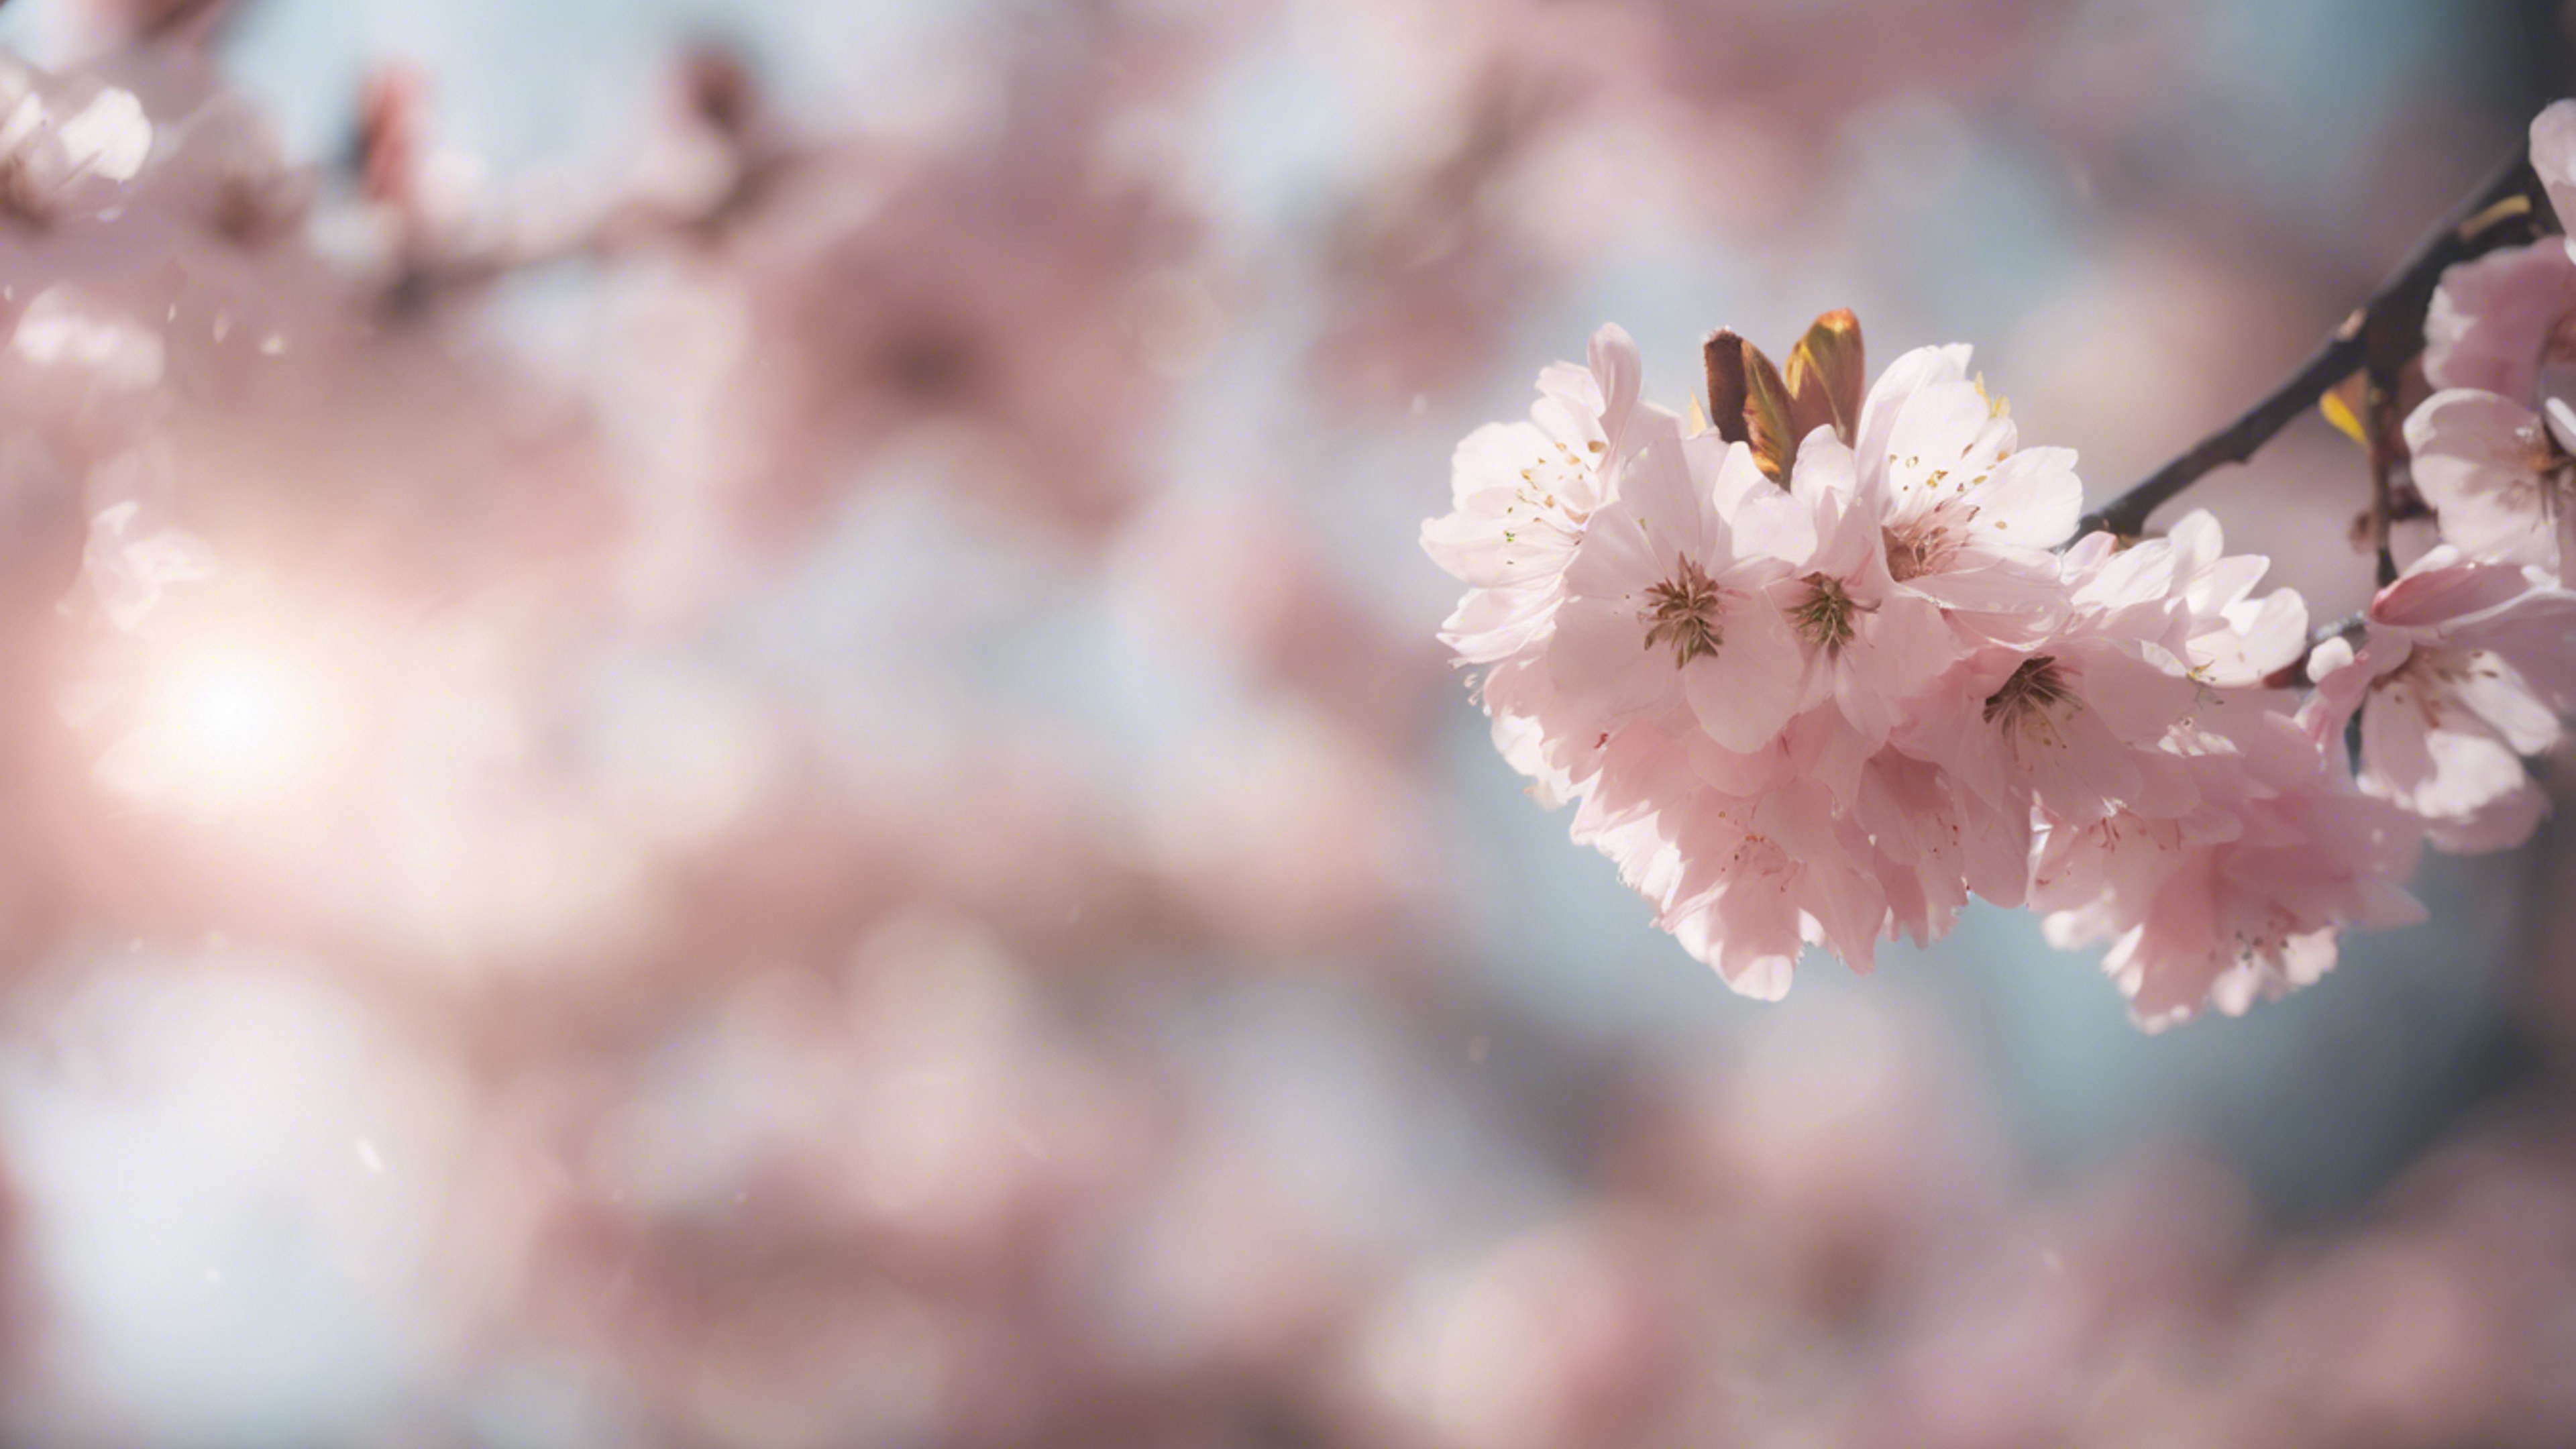 An ethereal dreamscape featuring cherry blossoms wafting in the soft spring breeze. Валлпапер[9de2e4f1deeb467ebab6]